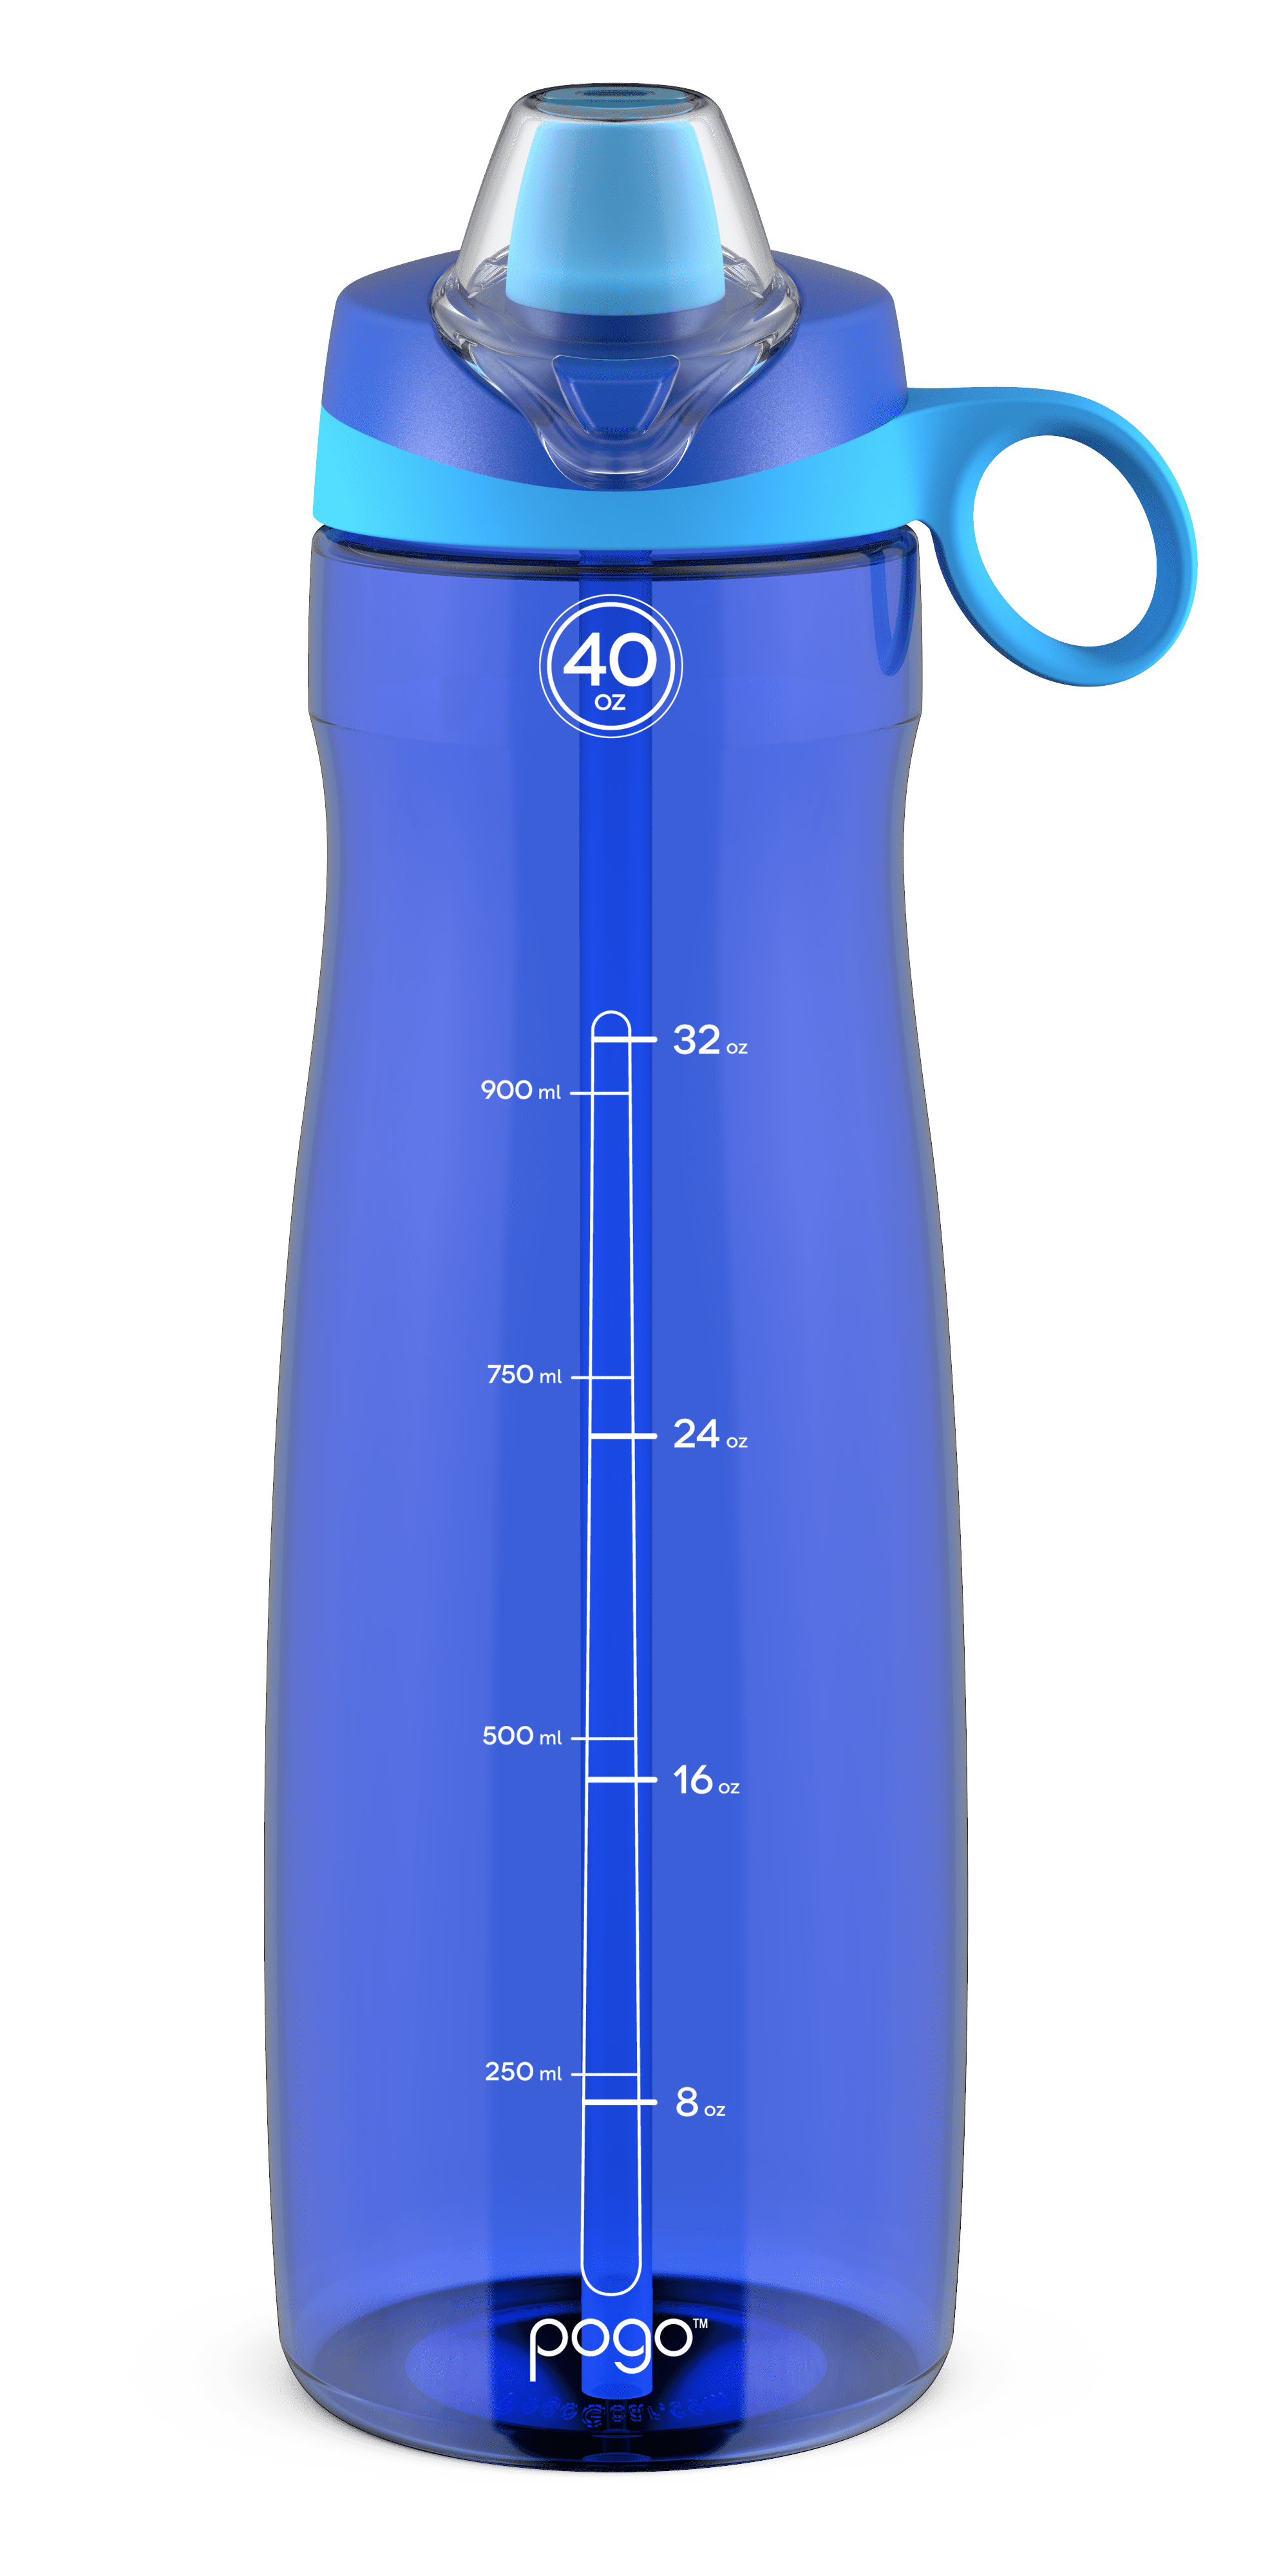  Embrava 40oz Water Bottle - Large with Travel Carry Ring - Wide  Leak Proof Drink Spout - Heavy-Duty, BPA & BPS Free Tritan Plastic - Best  for Sports, Hiking, Gym, Men